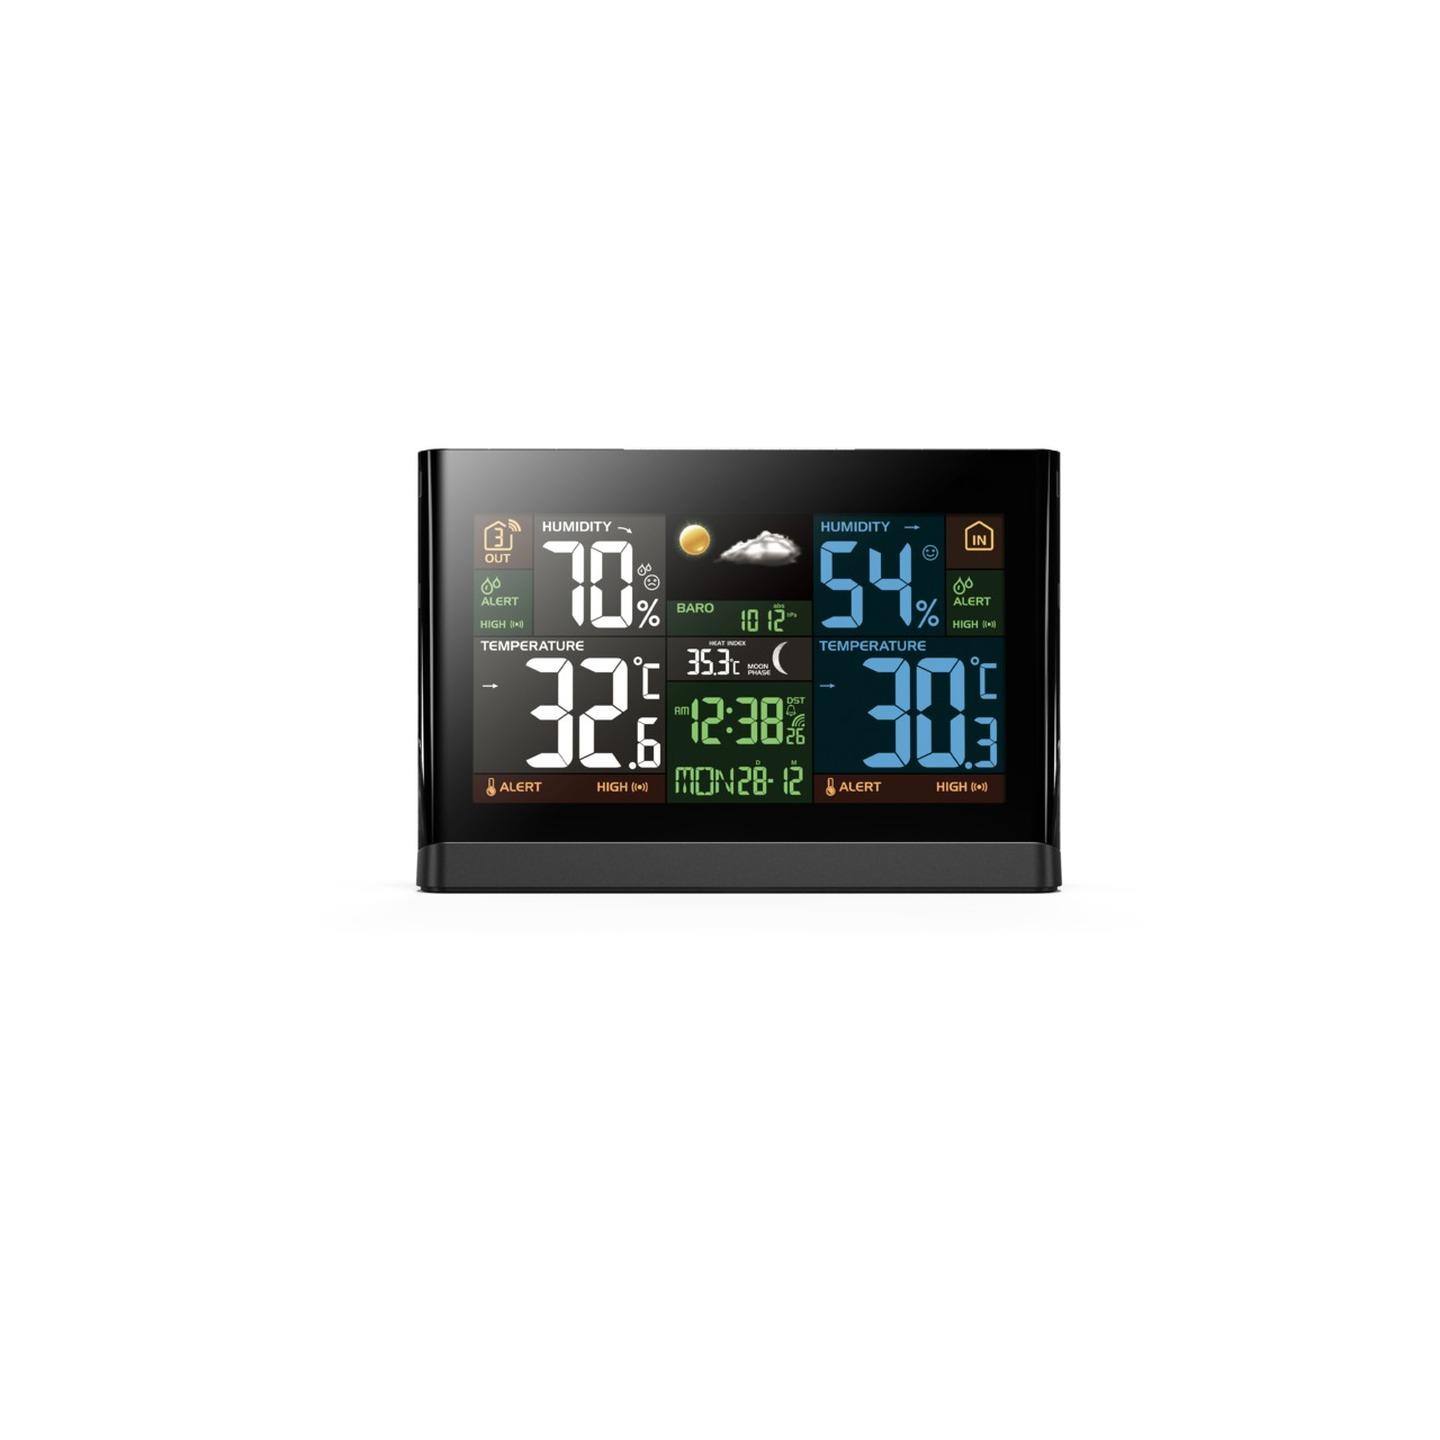 Temperature/Humidity Weather Station with 7 Inch Colour Display